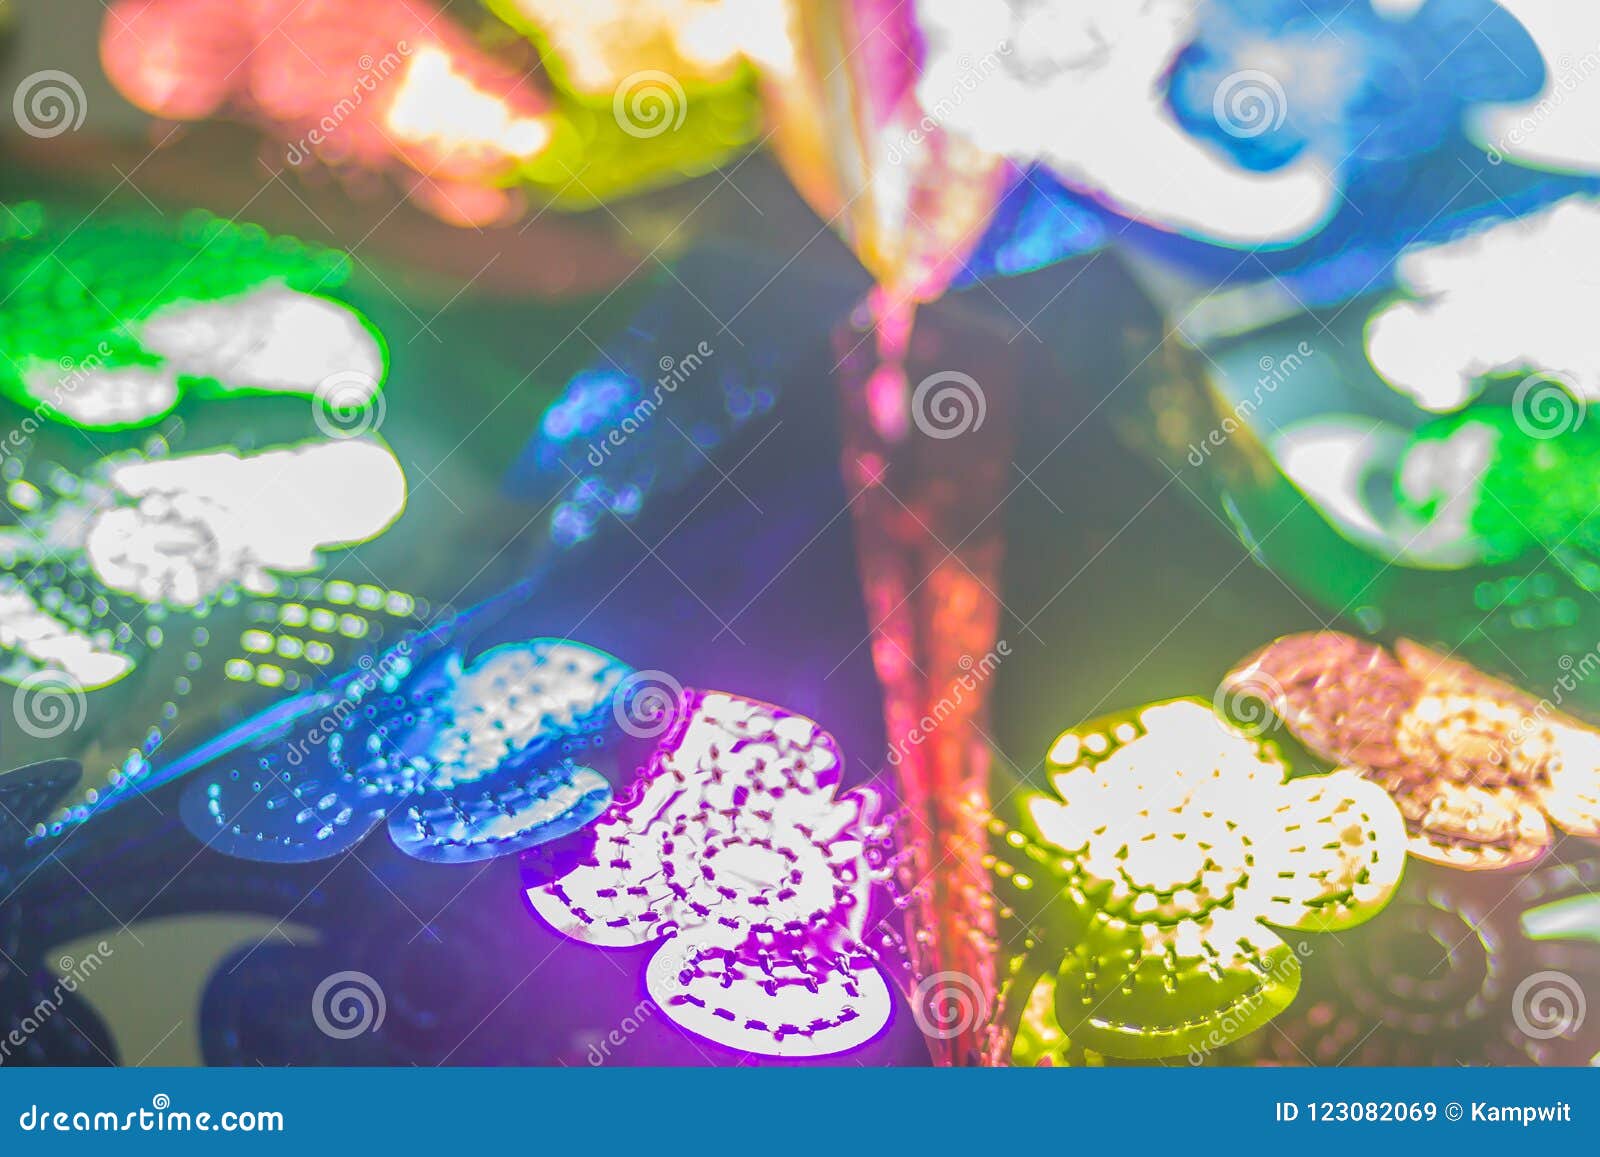 Abstract Blurred Colorful Garlands Are Hanging On The